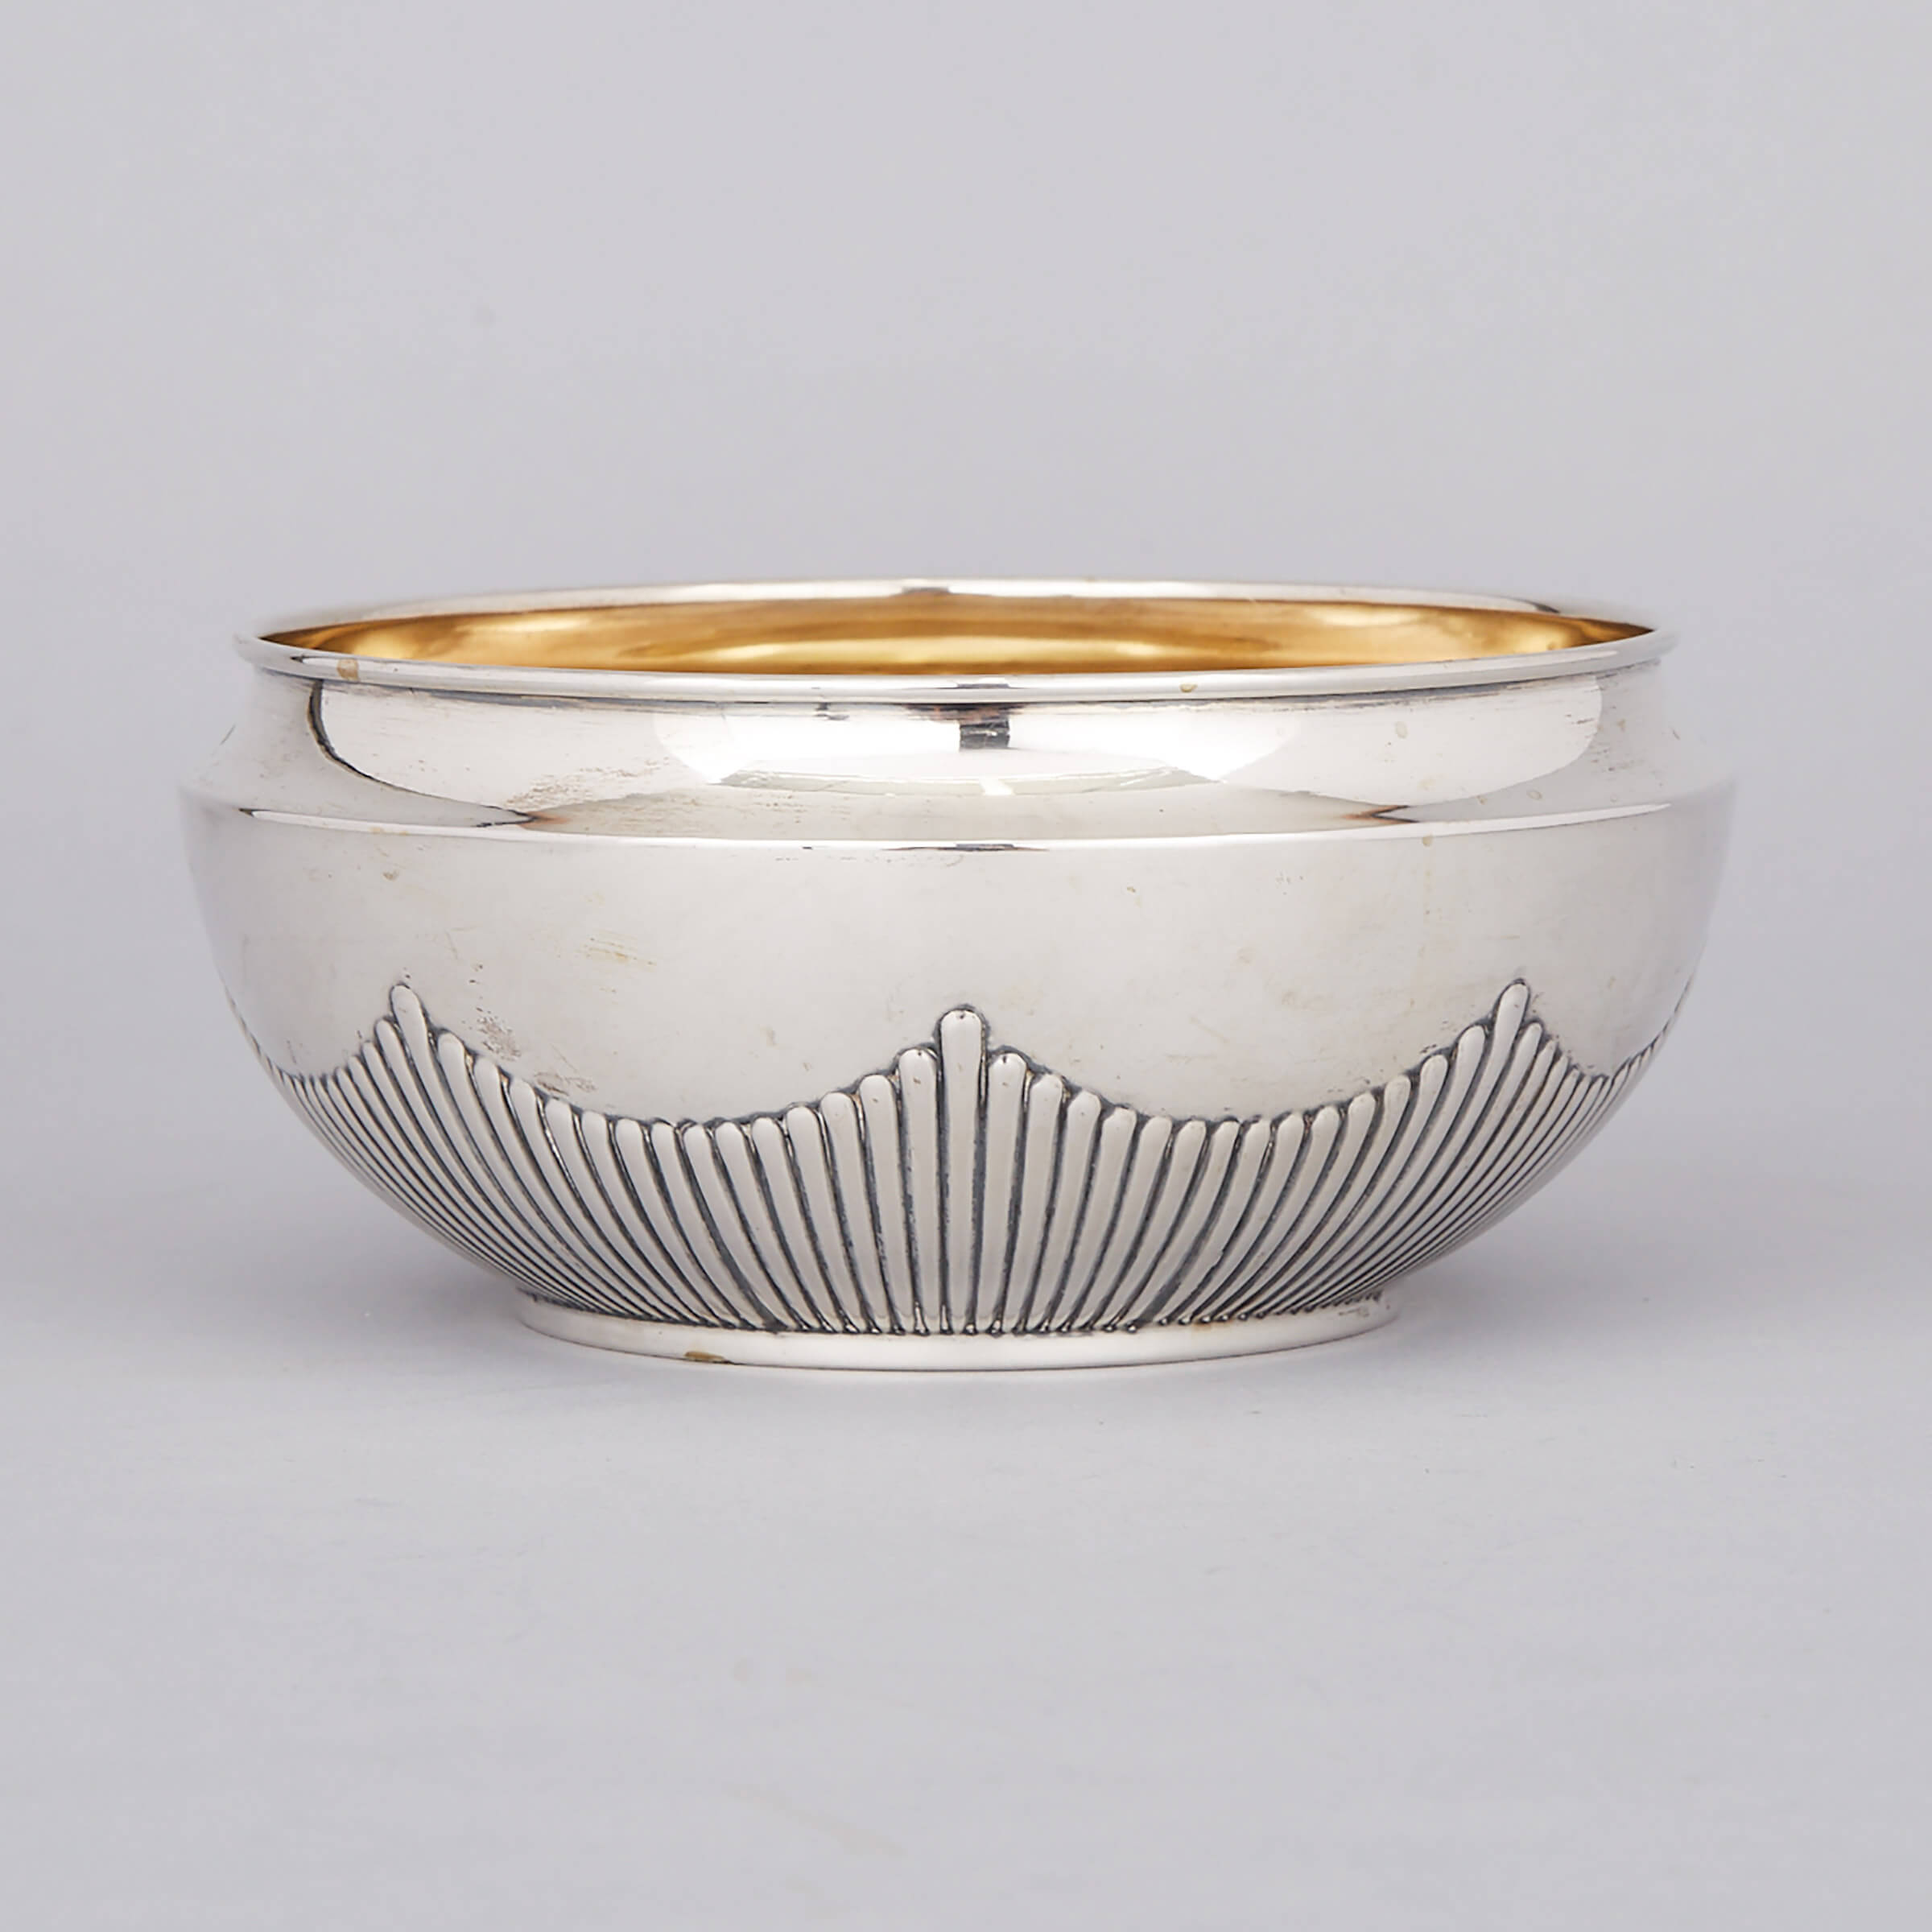 German Silver Bowl, early 20th century